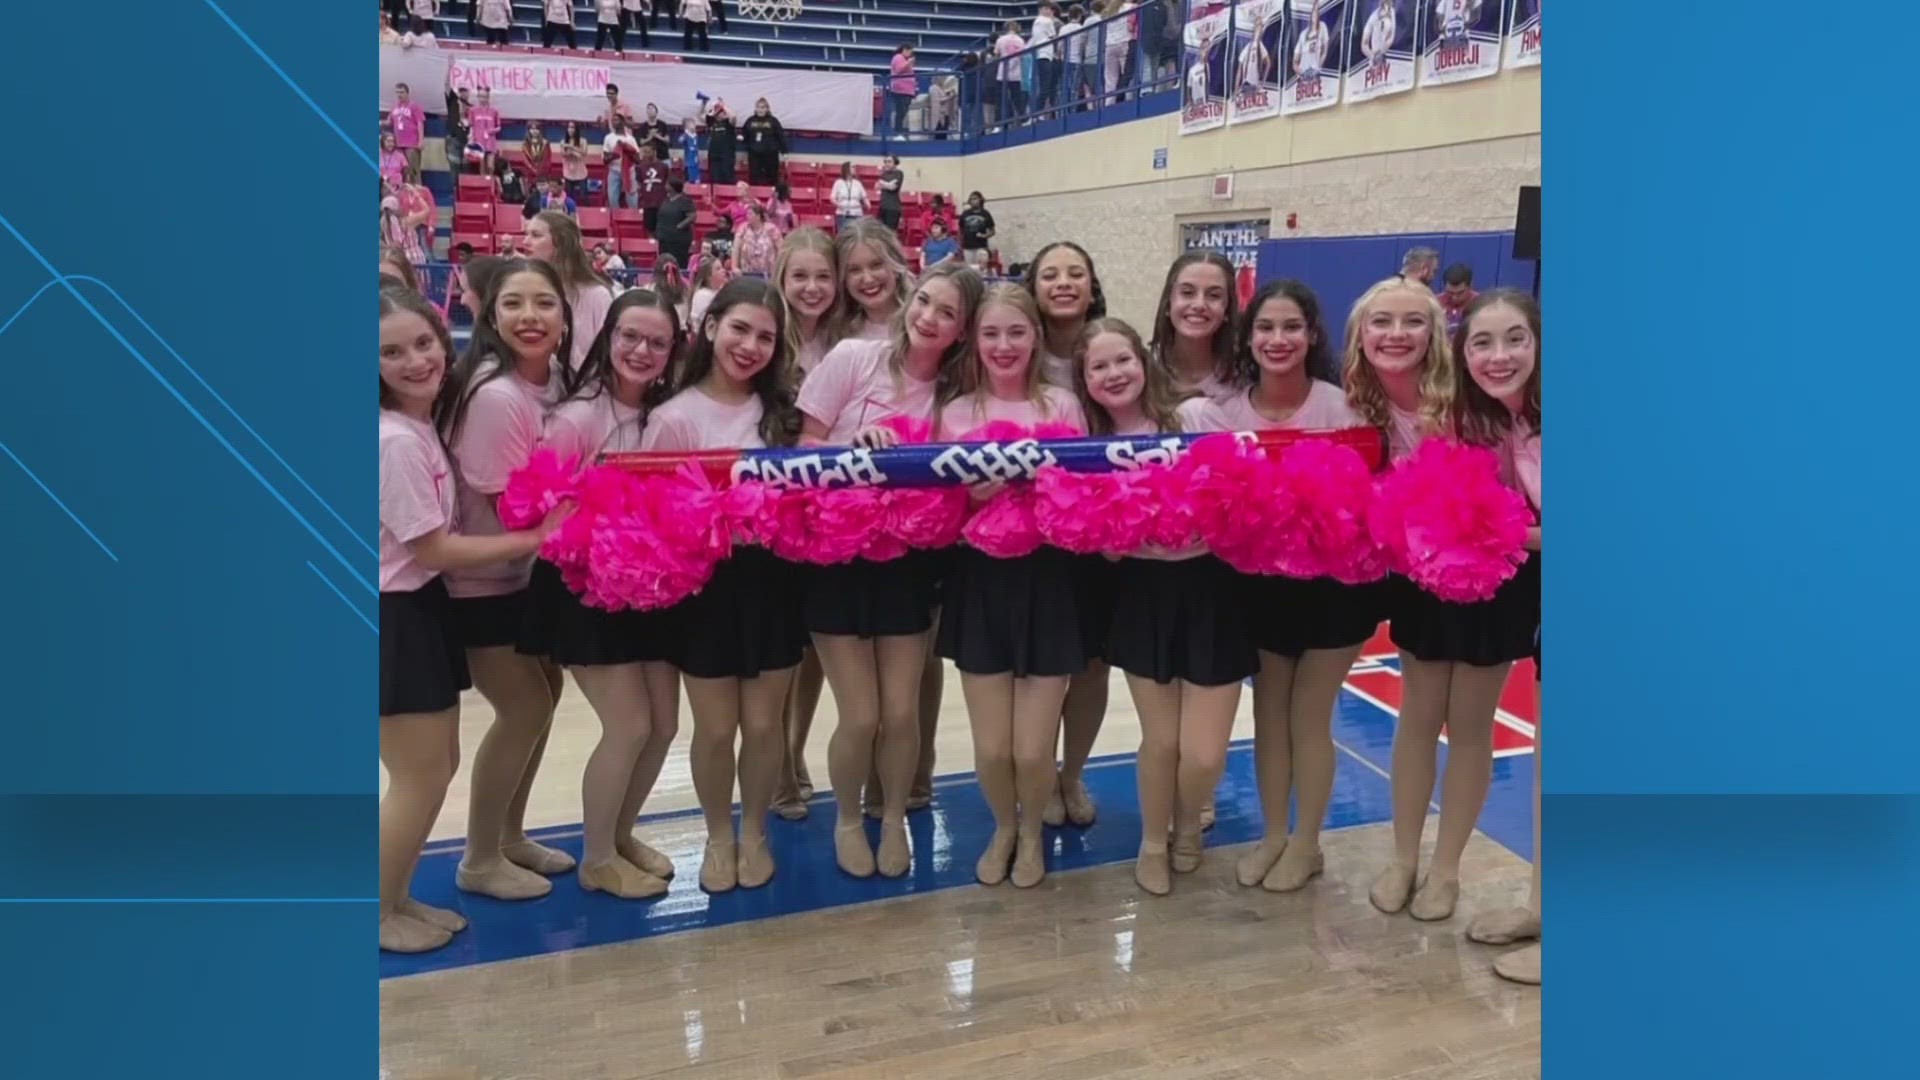 The Midway High School drill team was awarded for having memorable and extraordinary performances in their dance routines, specifically in jazz, high kick and pom.